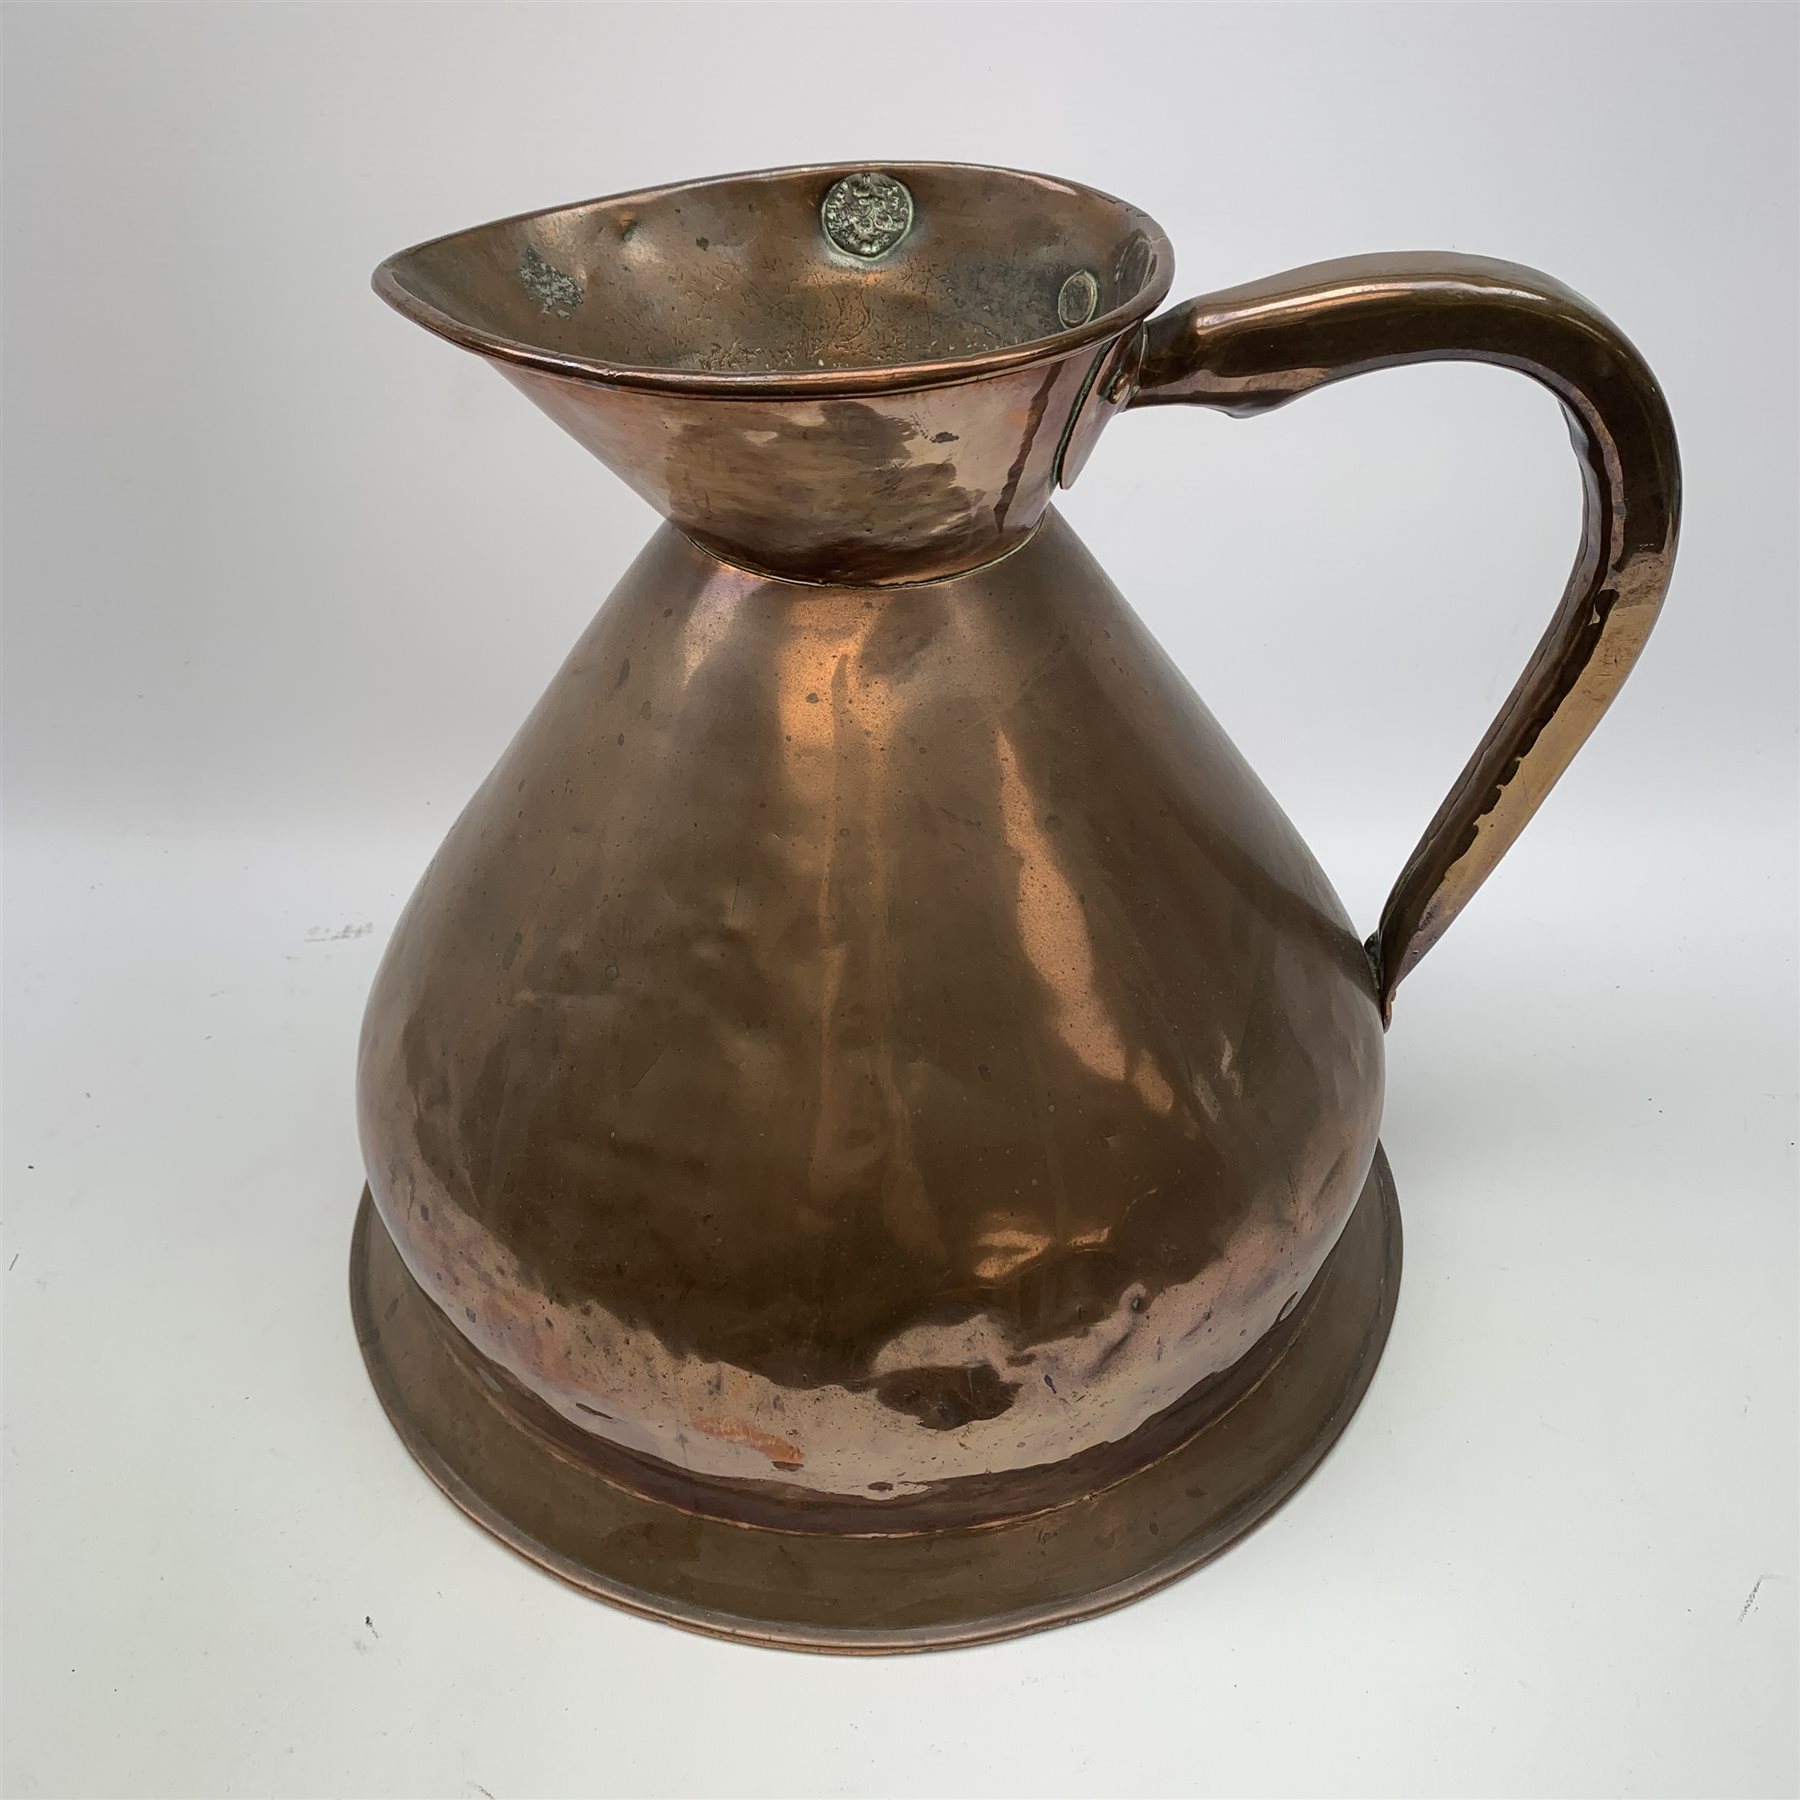 A large 19th century Copper measuring jug, marked 2 Gallon, with lead ...